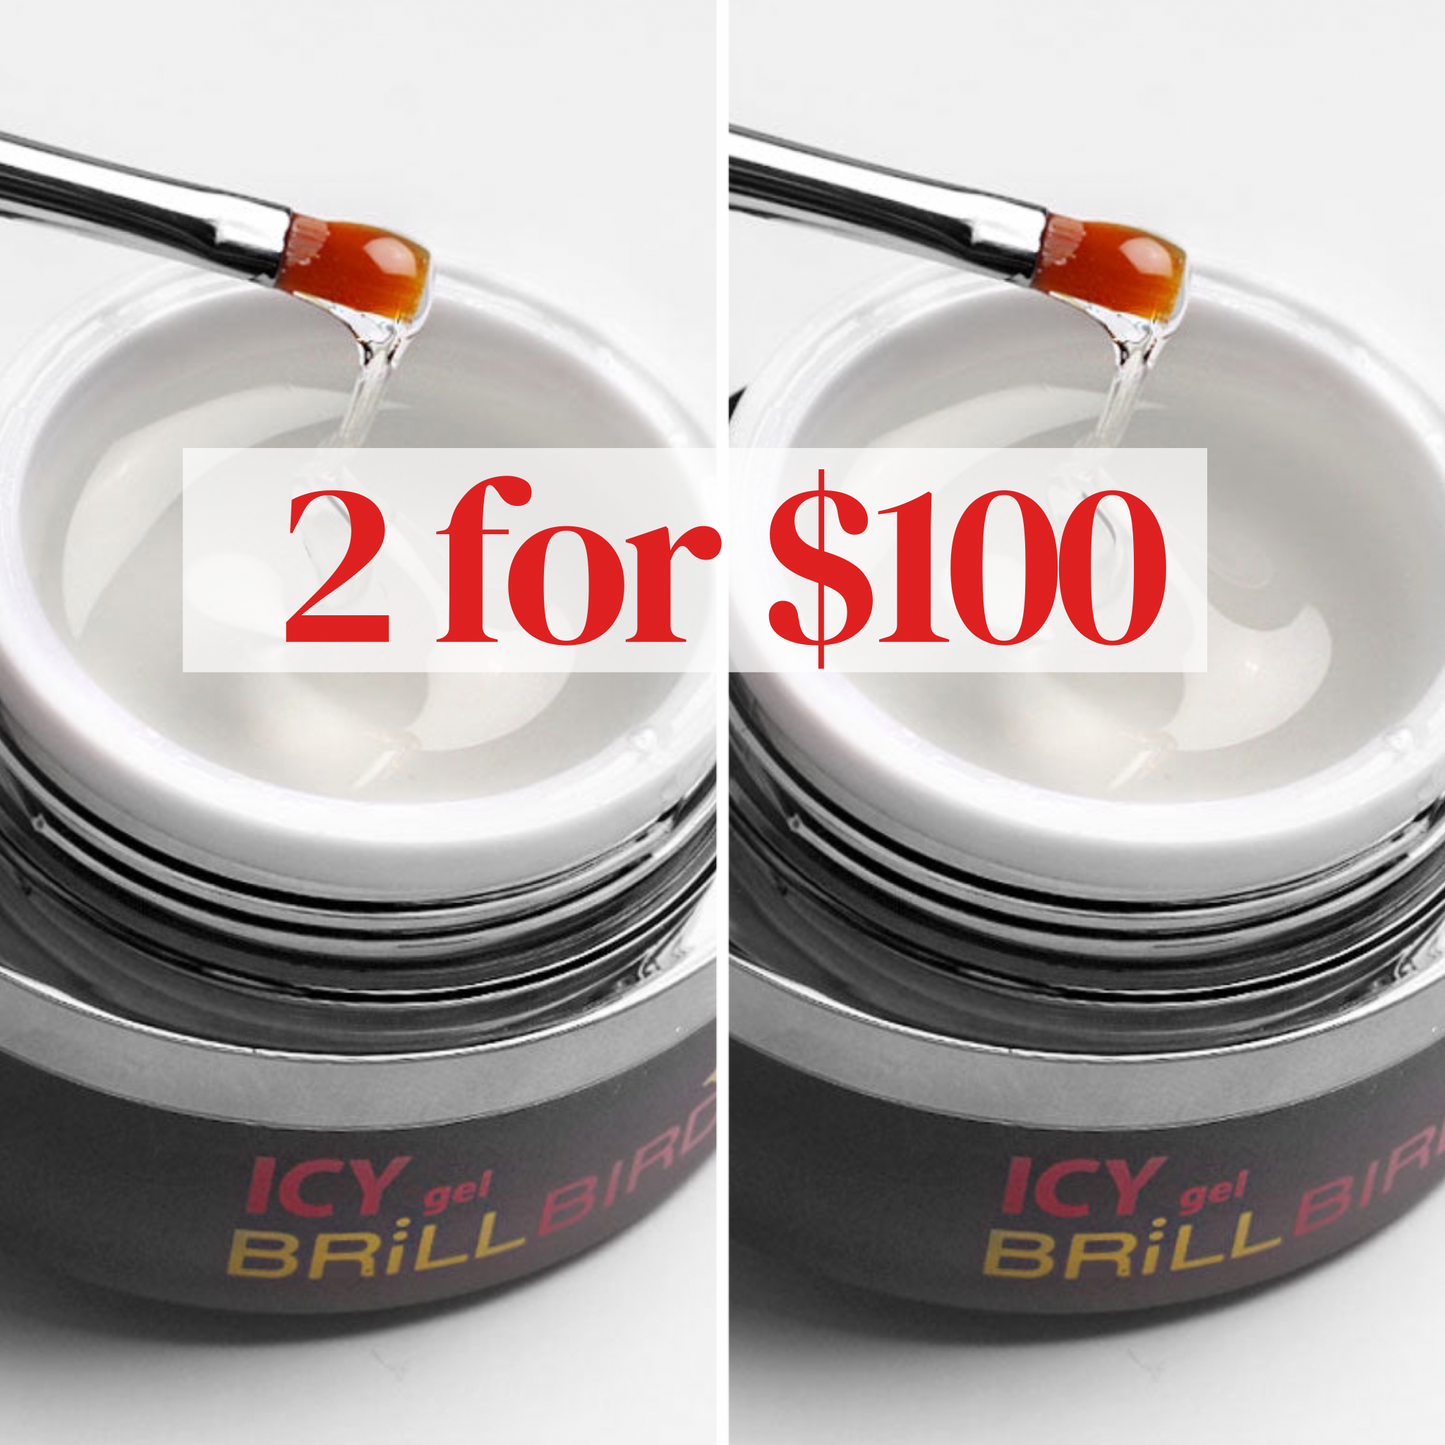 Icy gel 50ml duo (2 for $100)